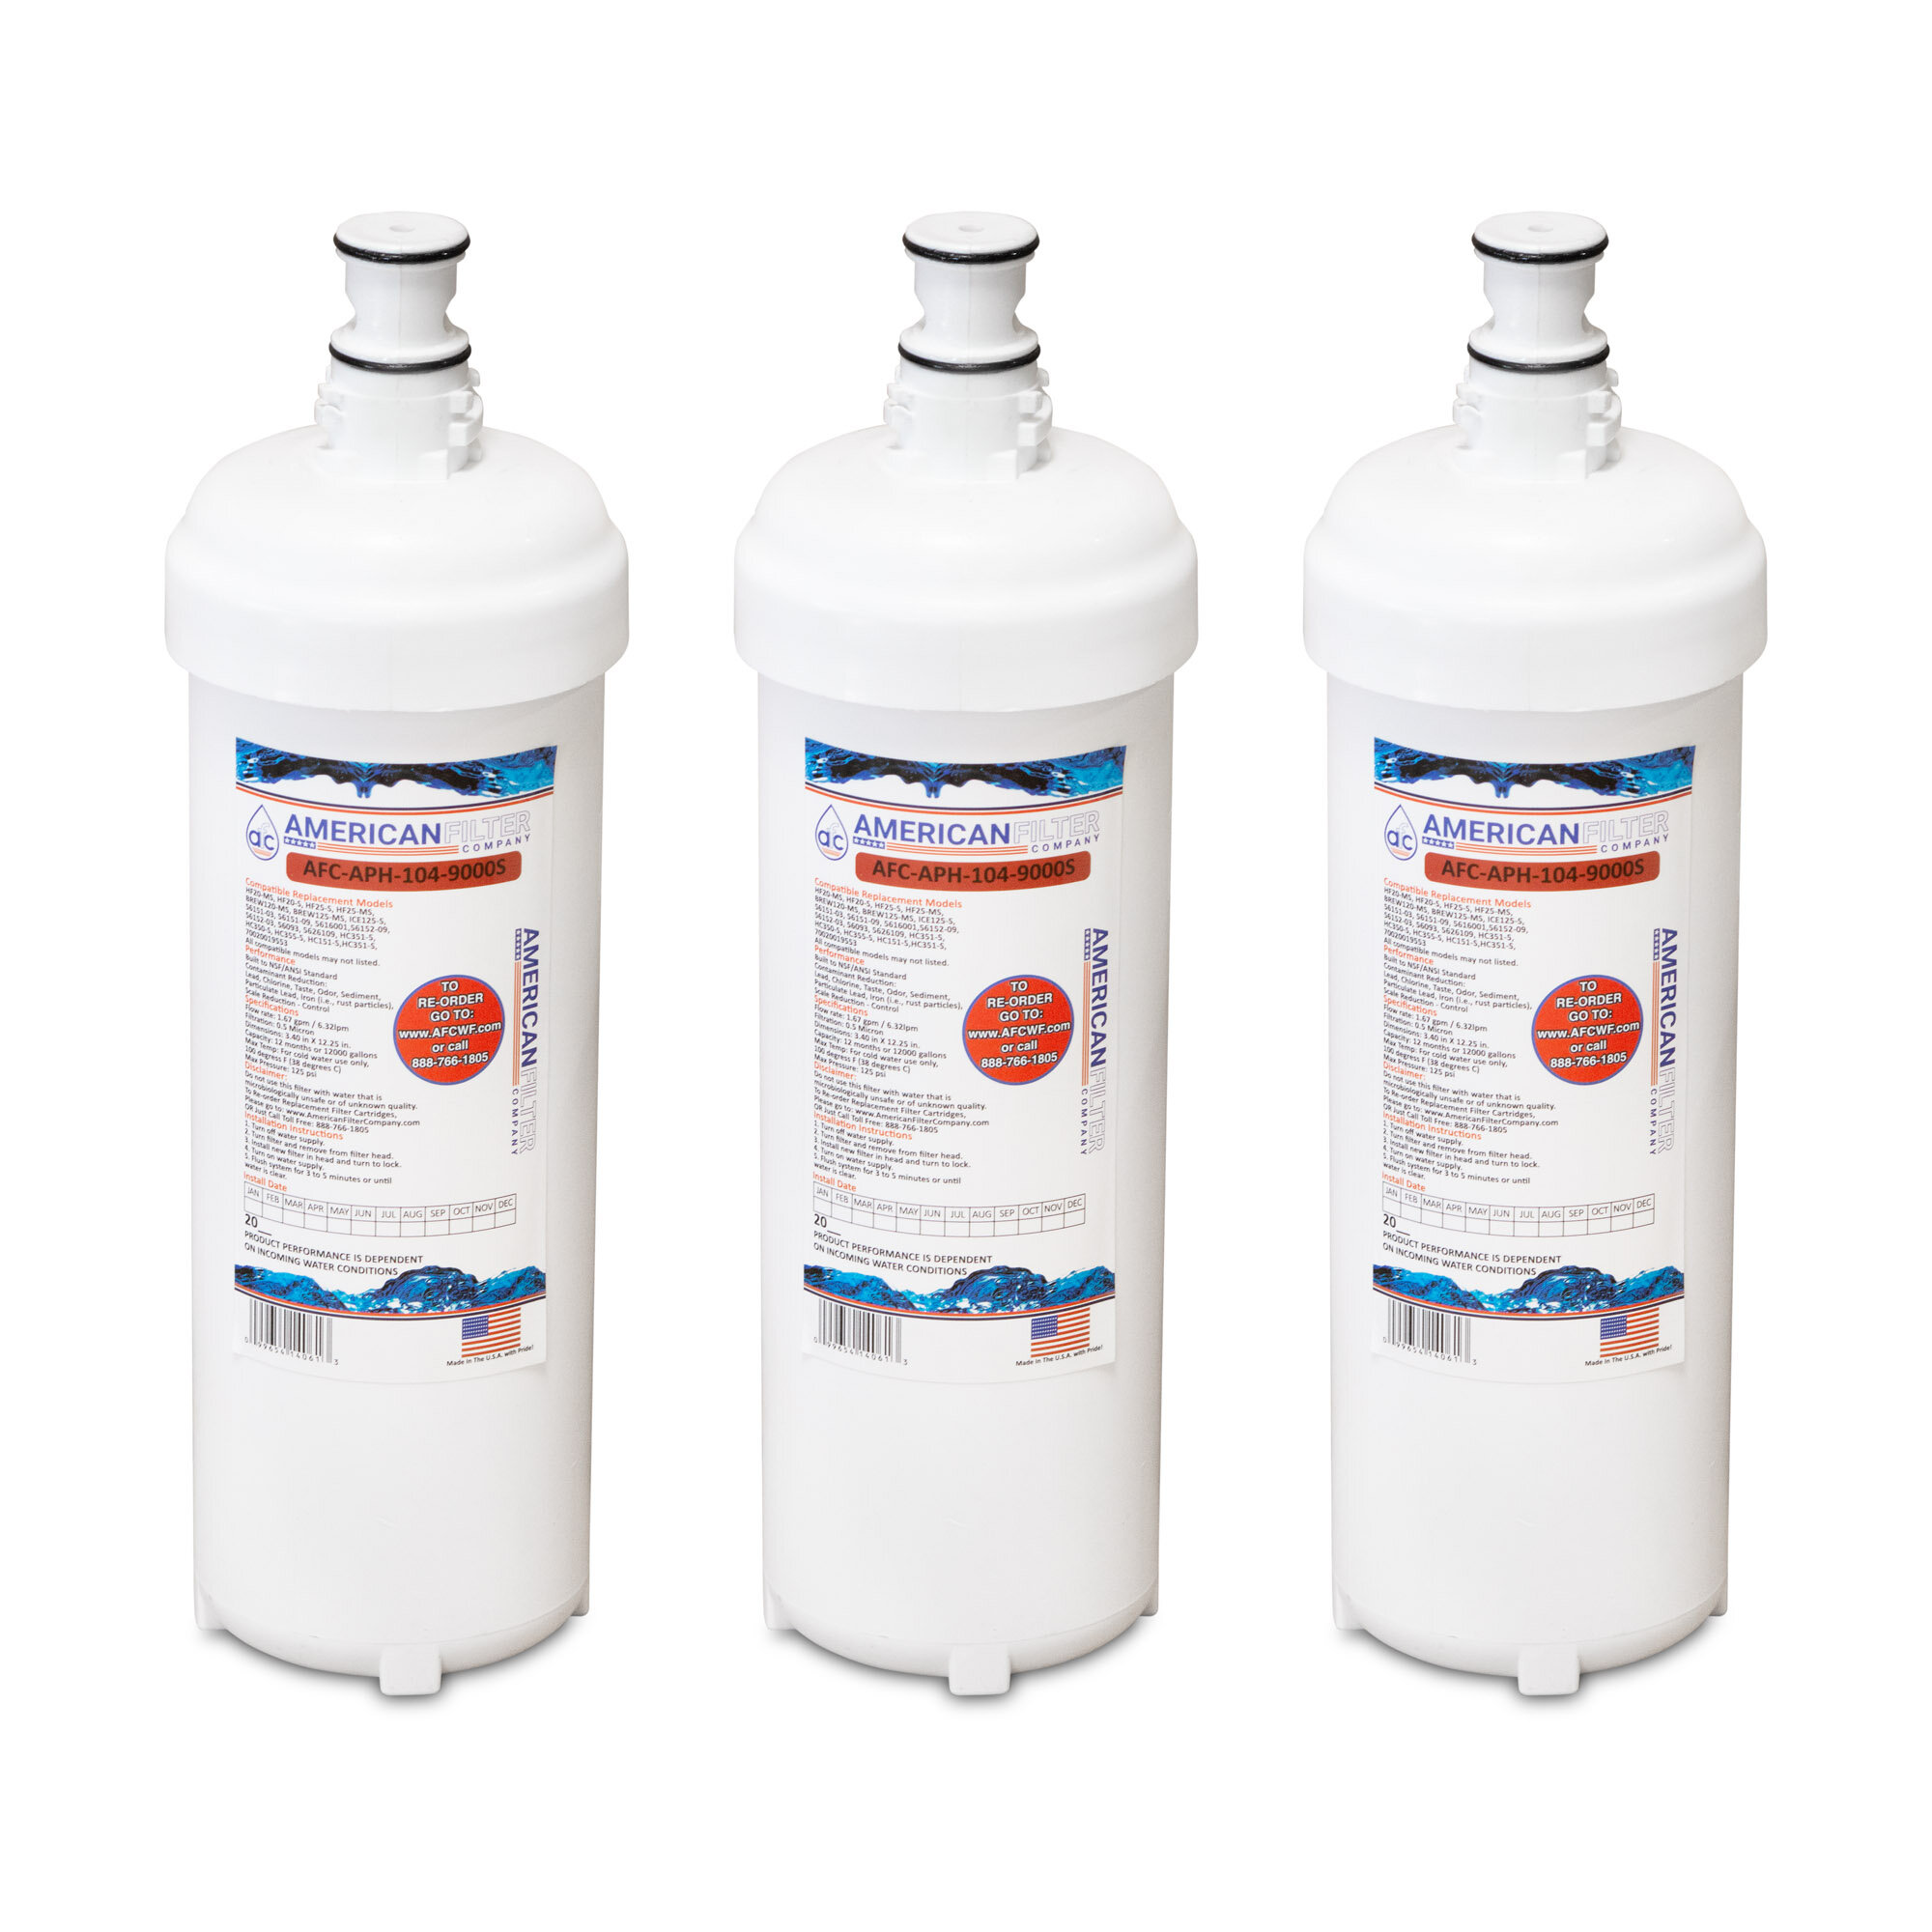 AFC Brand Water Filters, Compatible with Hf25-S Water Filters